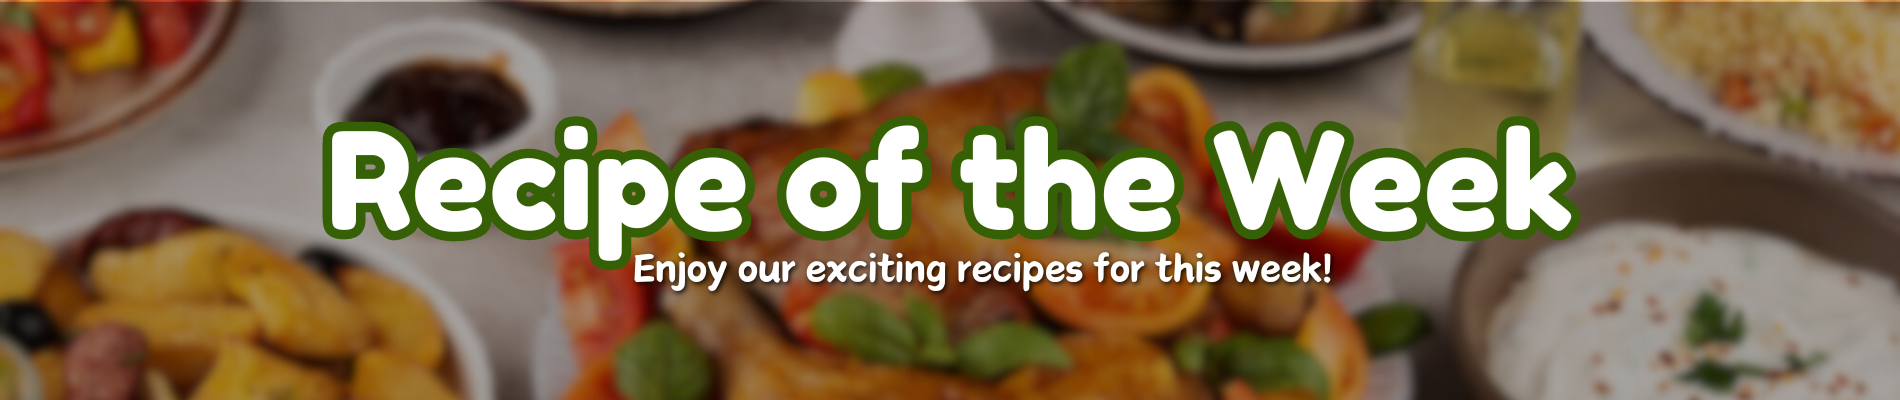 Recipe of the week Banner